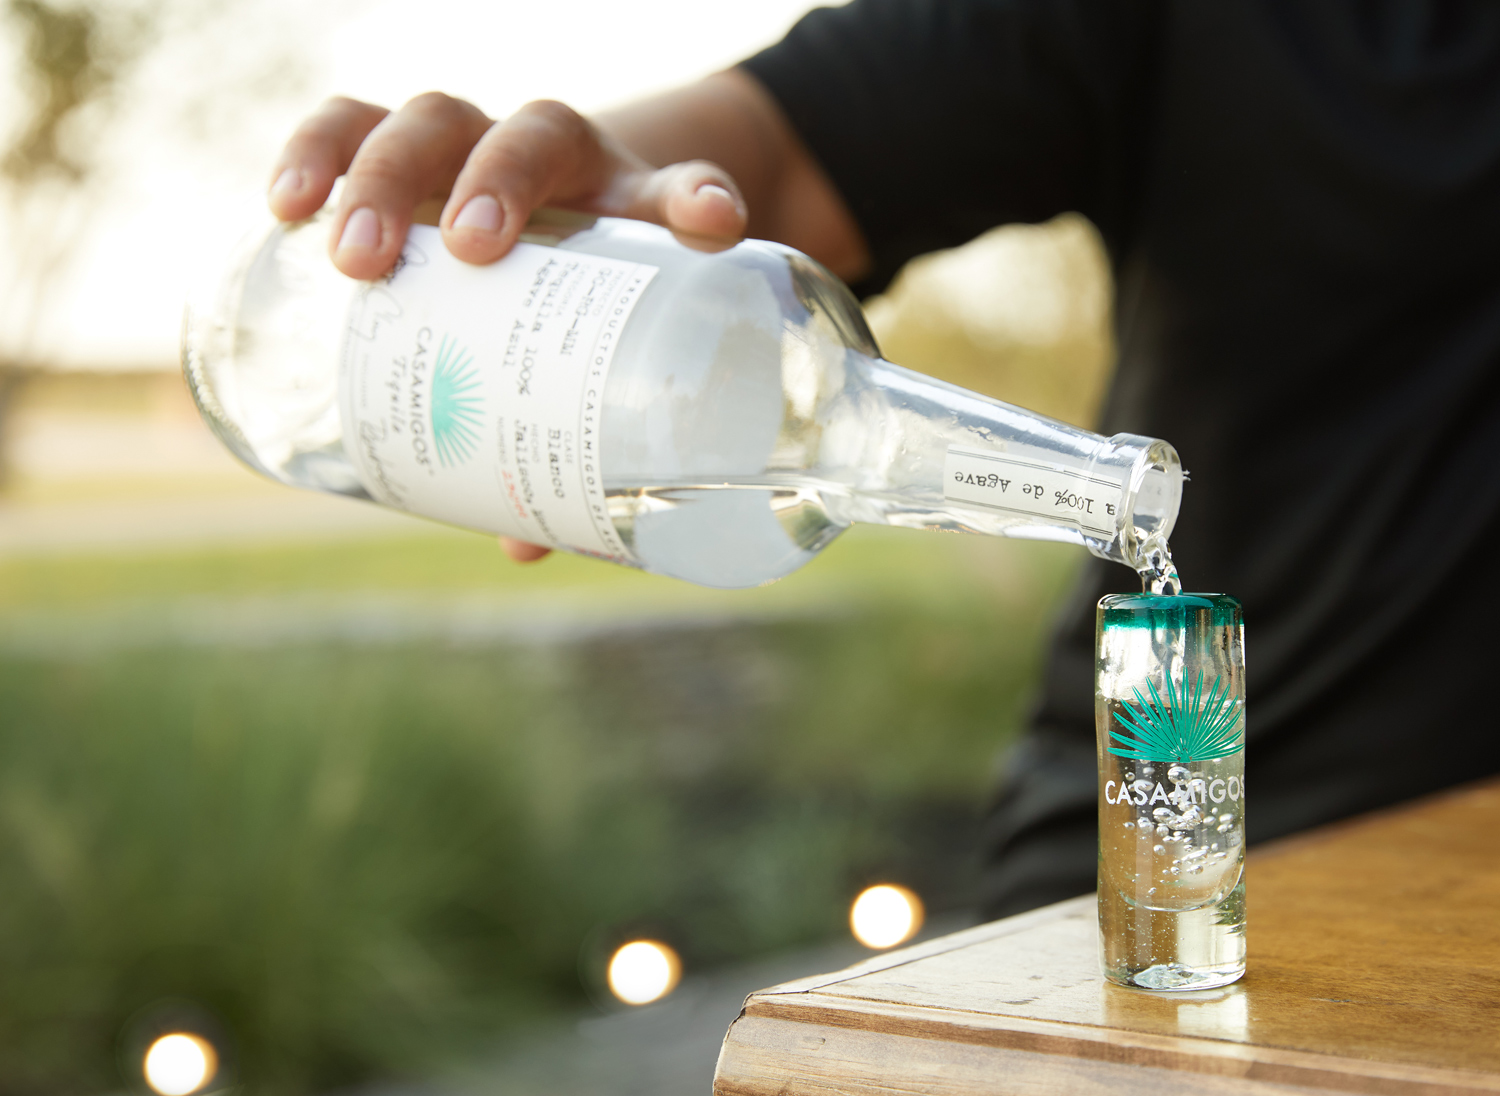 Pouring Casamigos tequila by lifestyle photographer Buff Strickland